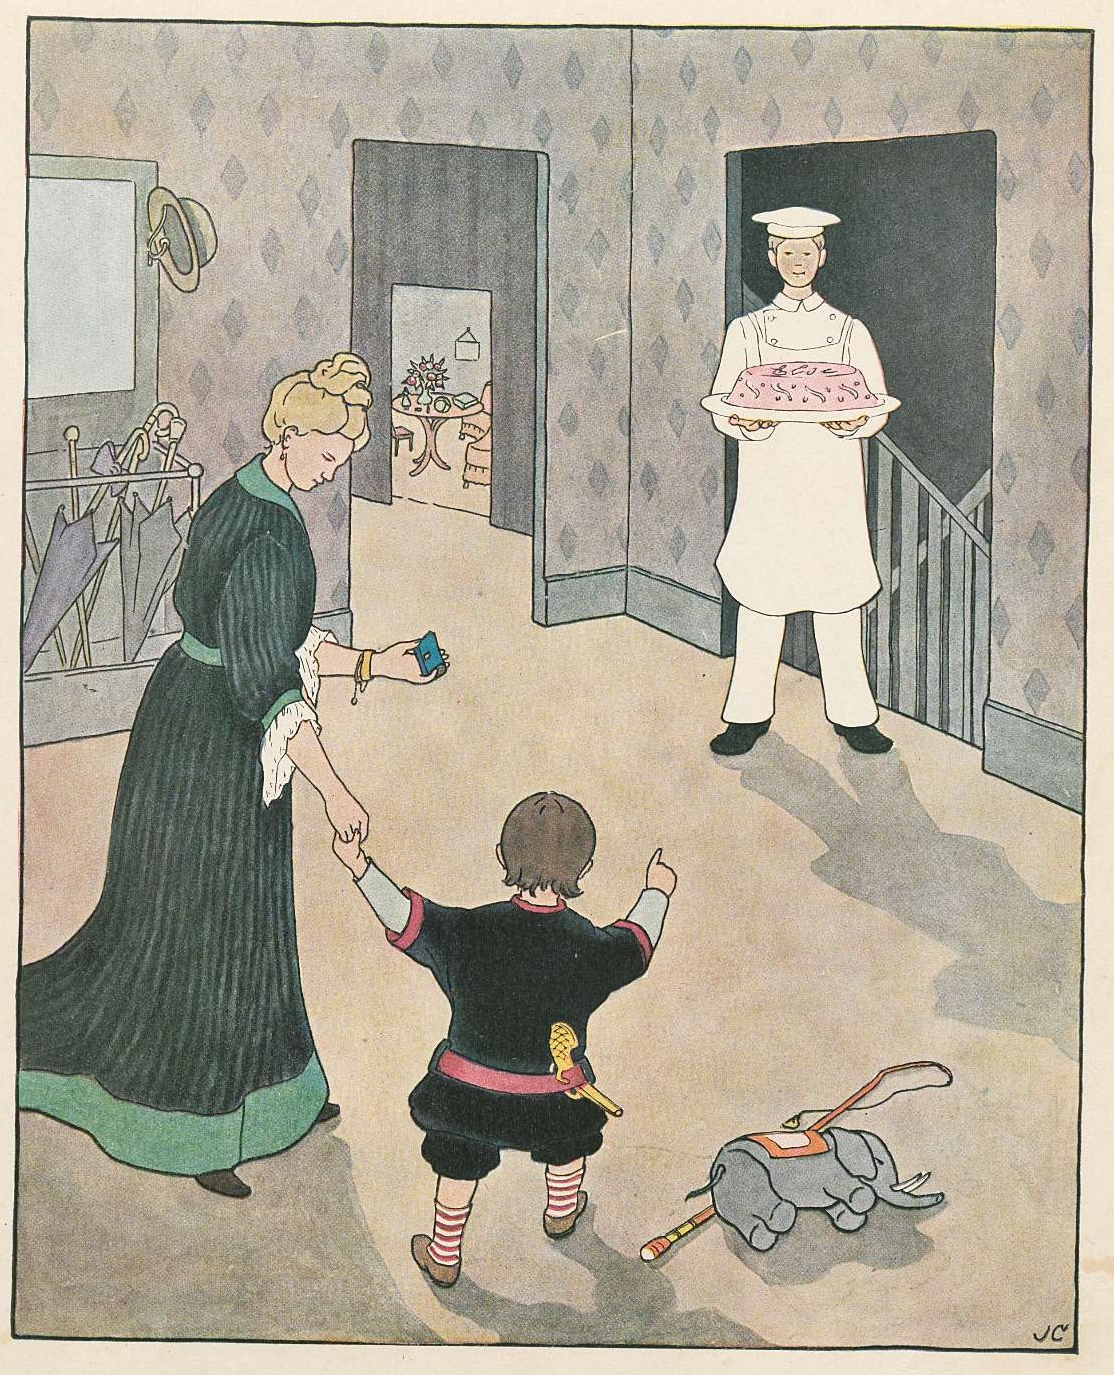 Kinderbuch Wer kommt? (Who's Coming?) 1910